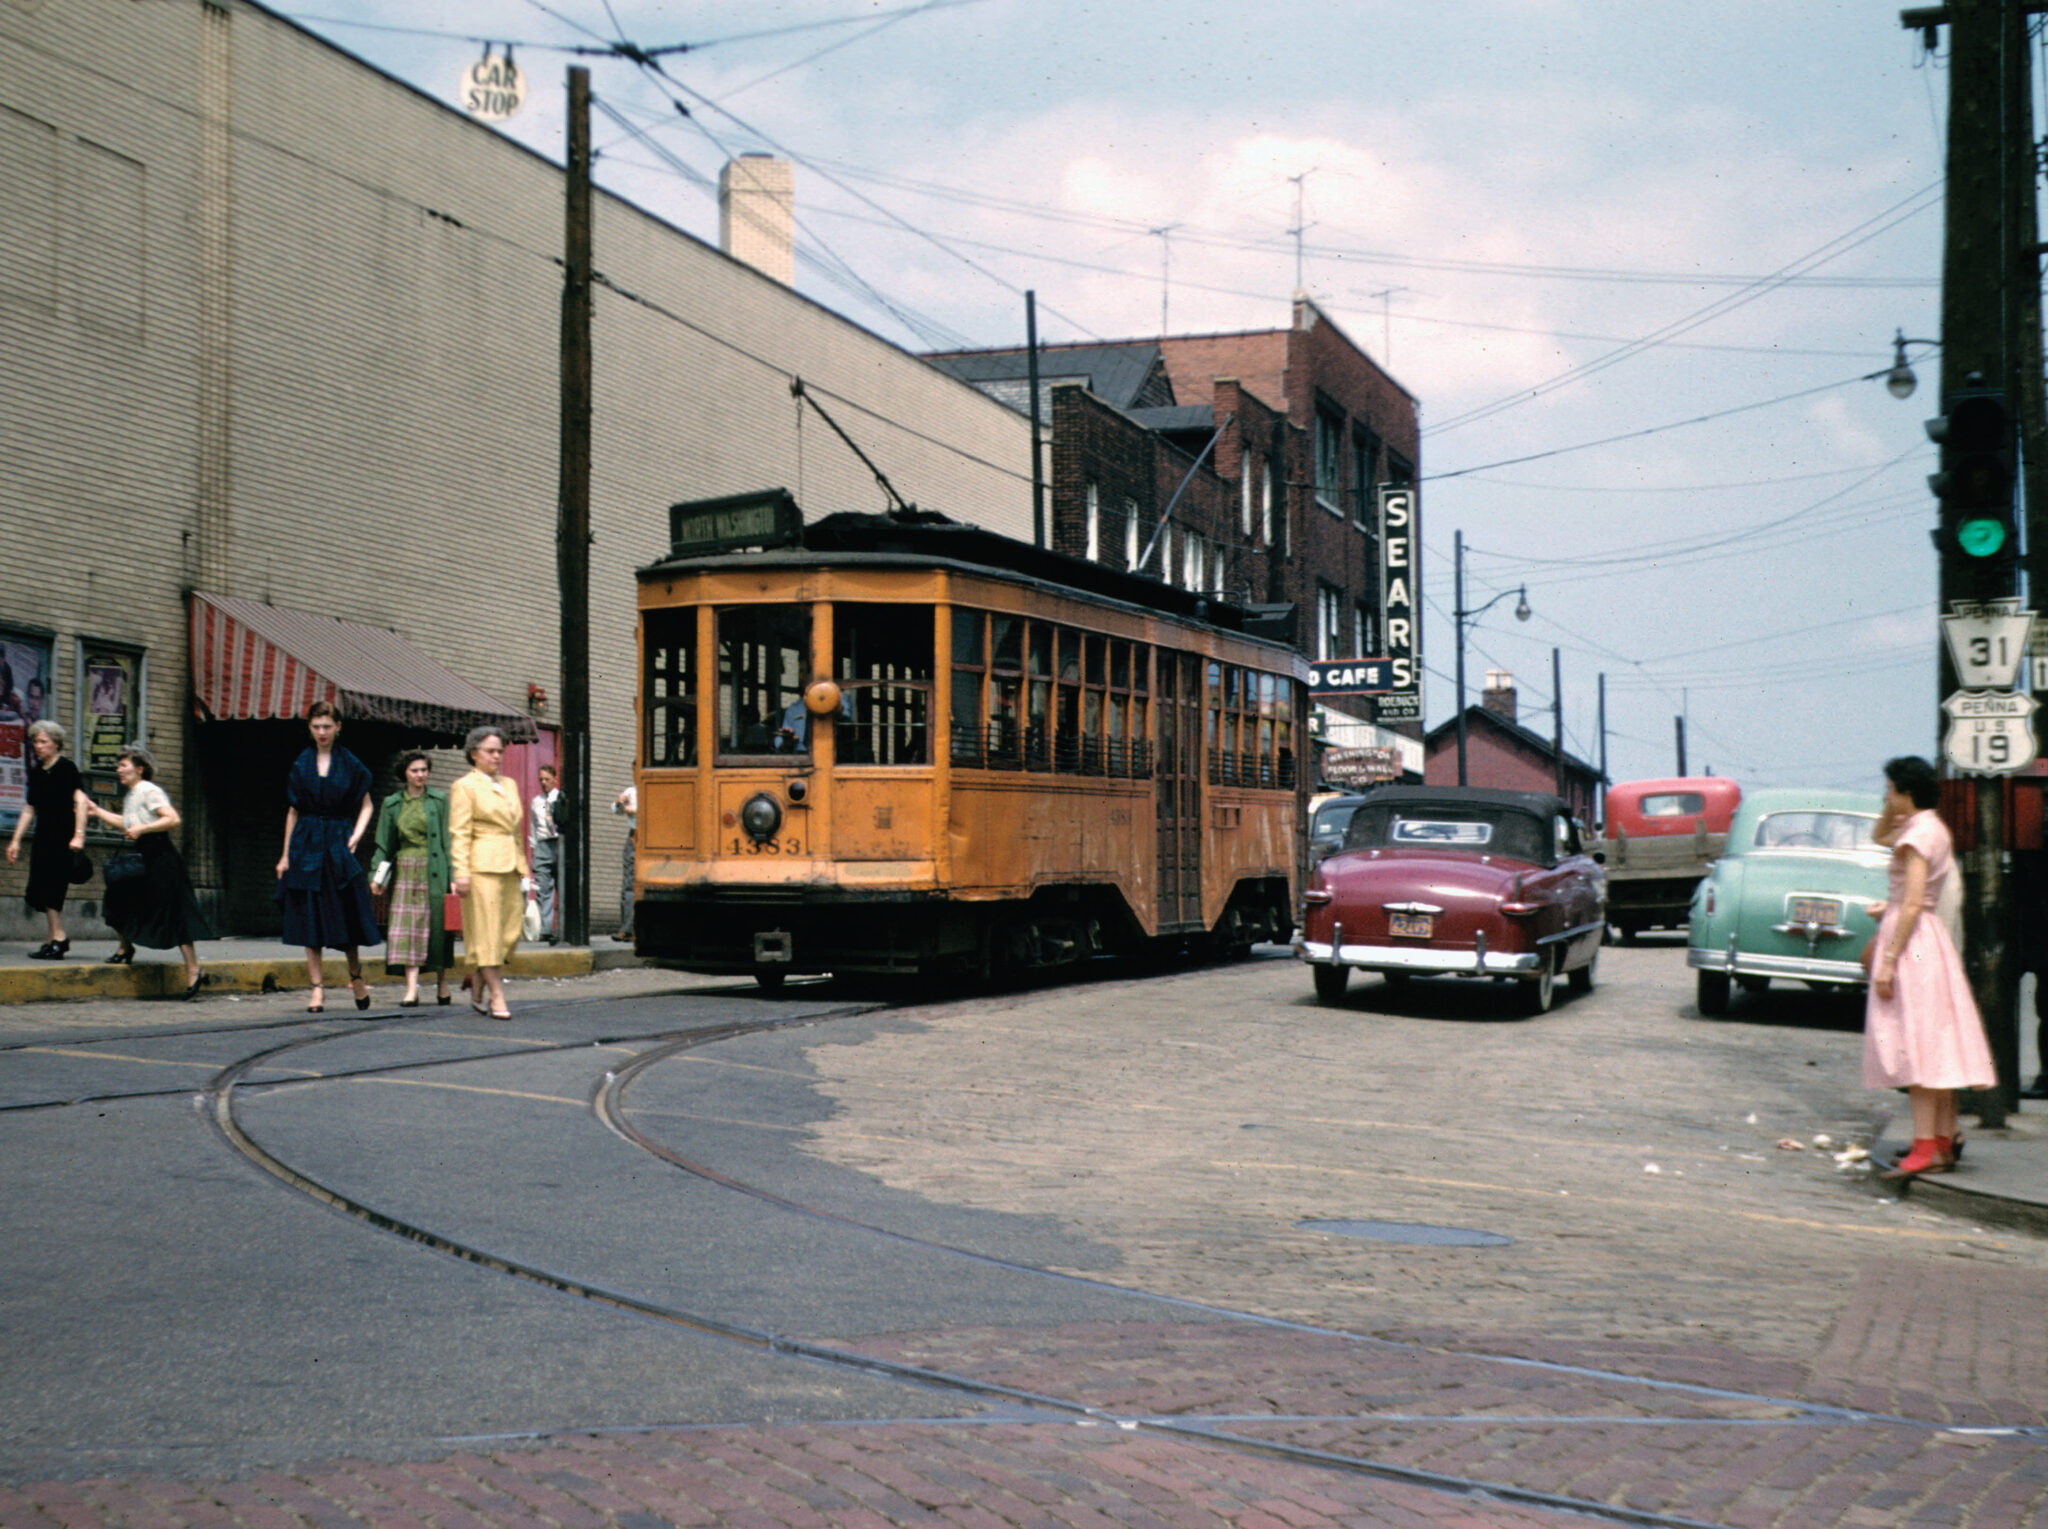 An orange low-floor has just rounded a curve in the rail at the corner of Chestnut St and Main St in Washington, PA in 1952. The trolley is headed away from the photographer. There are people on both sides of the street (behind the trolley), some are beginning to cross the street. There are also cars to the right of the trolley, driving in the street.